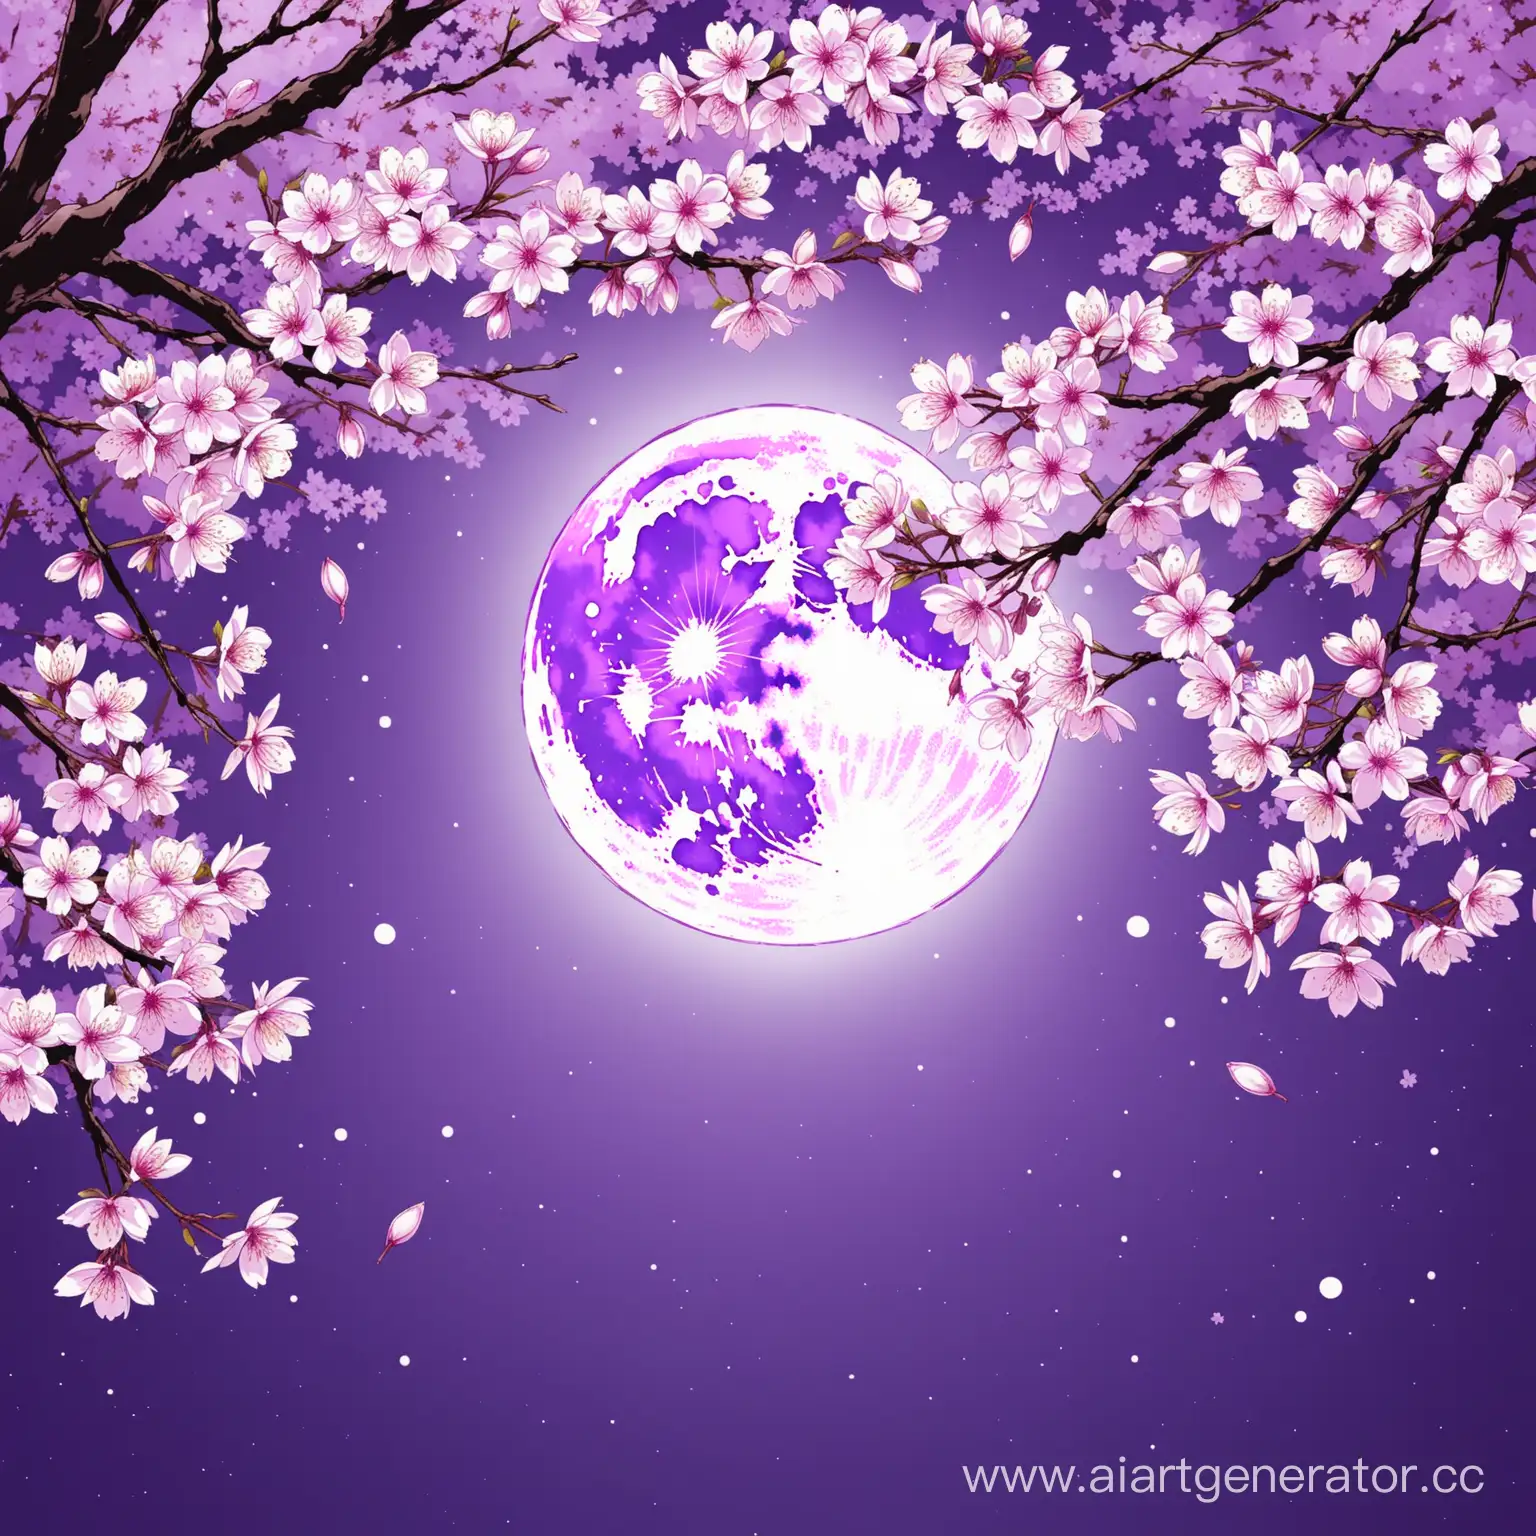 Moonlit-Sakura-Blossoms-in-Shades-of-White-and-Purple